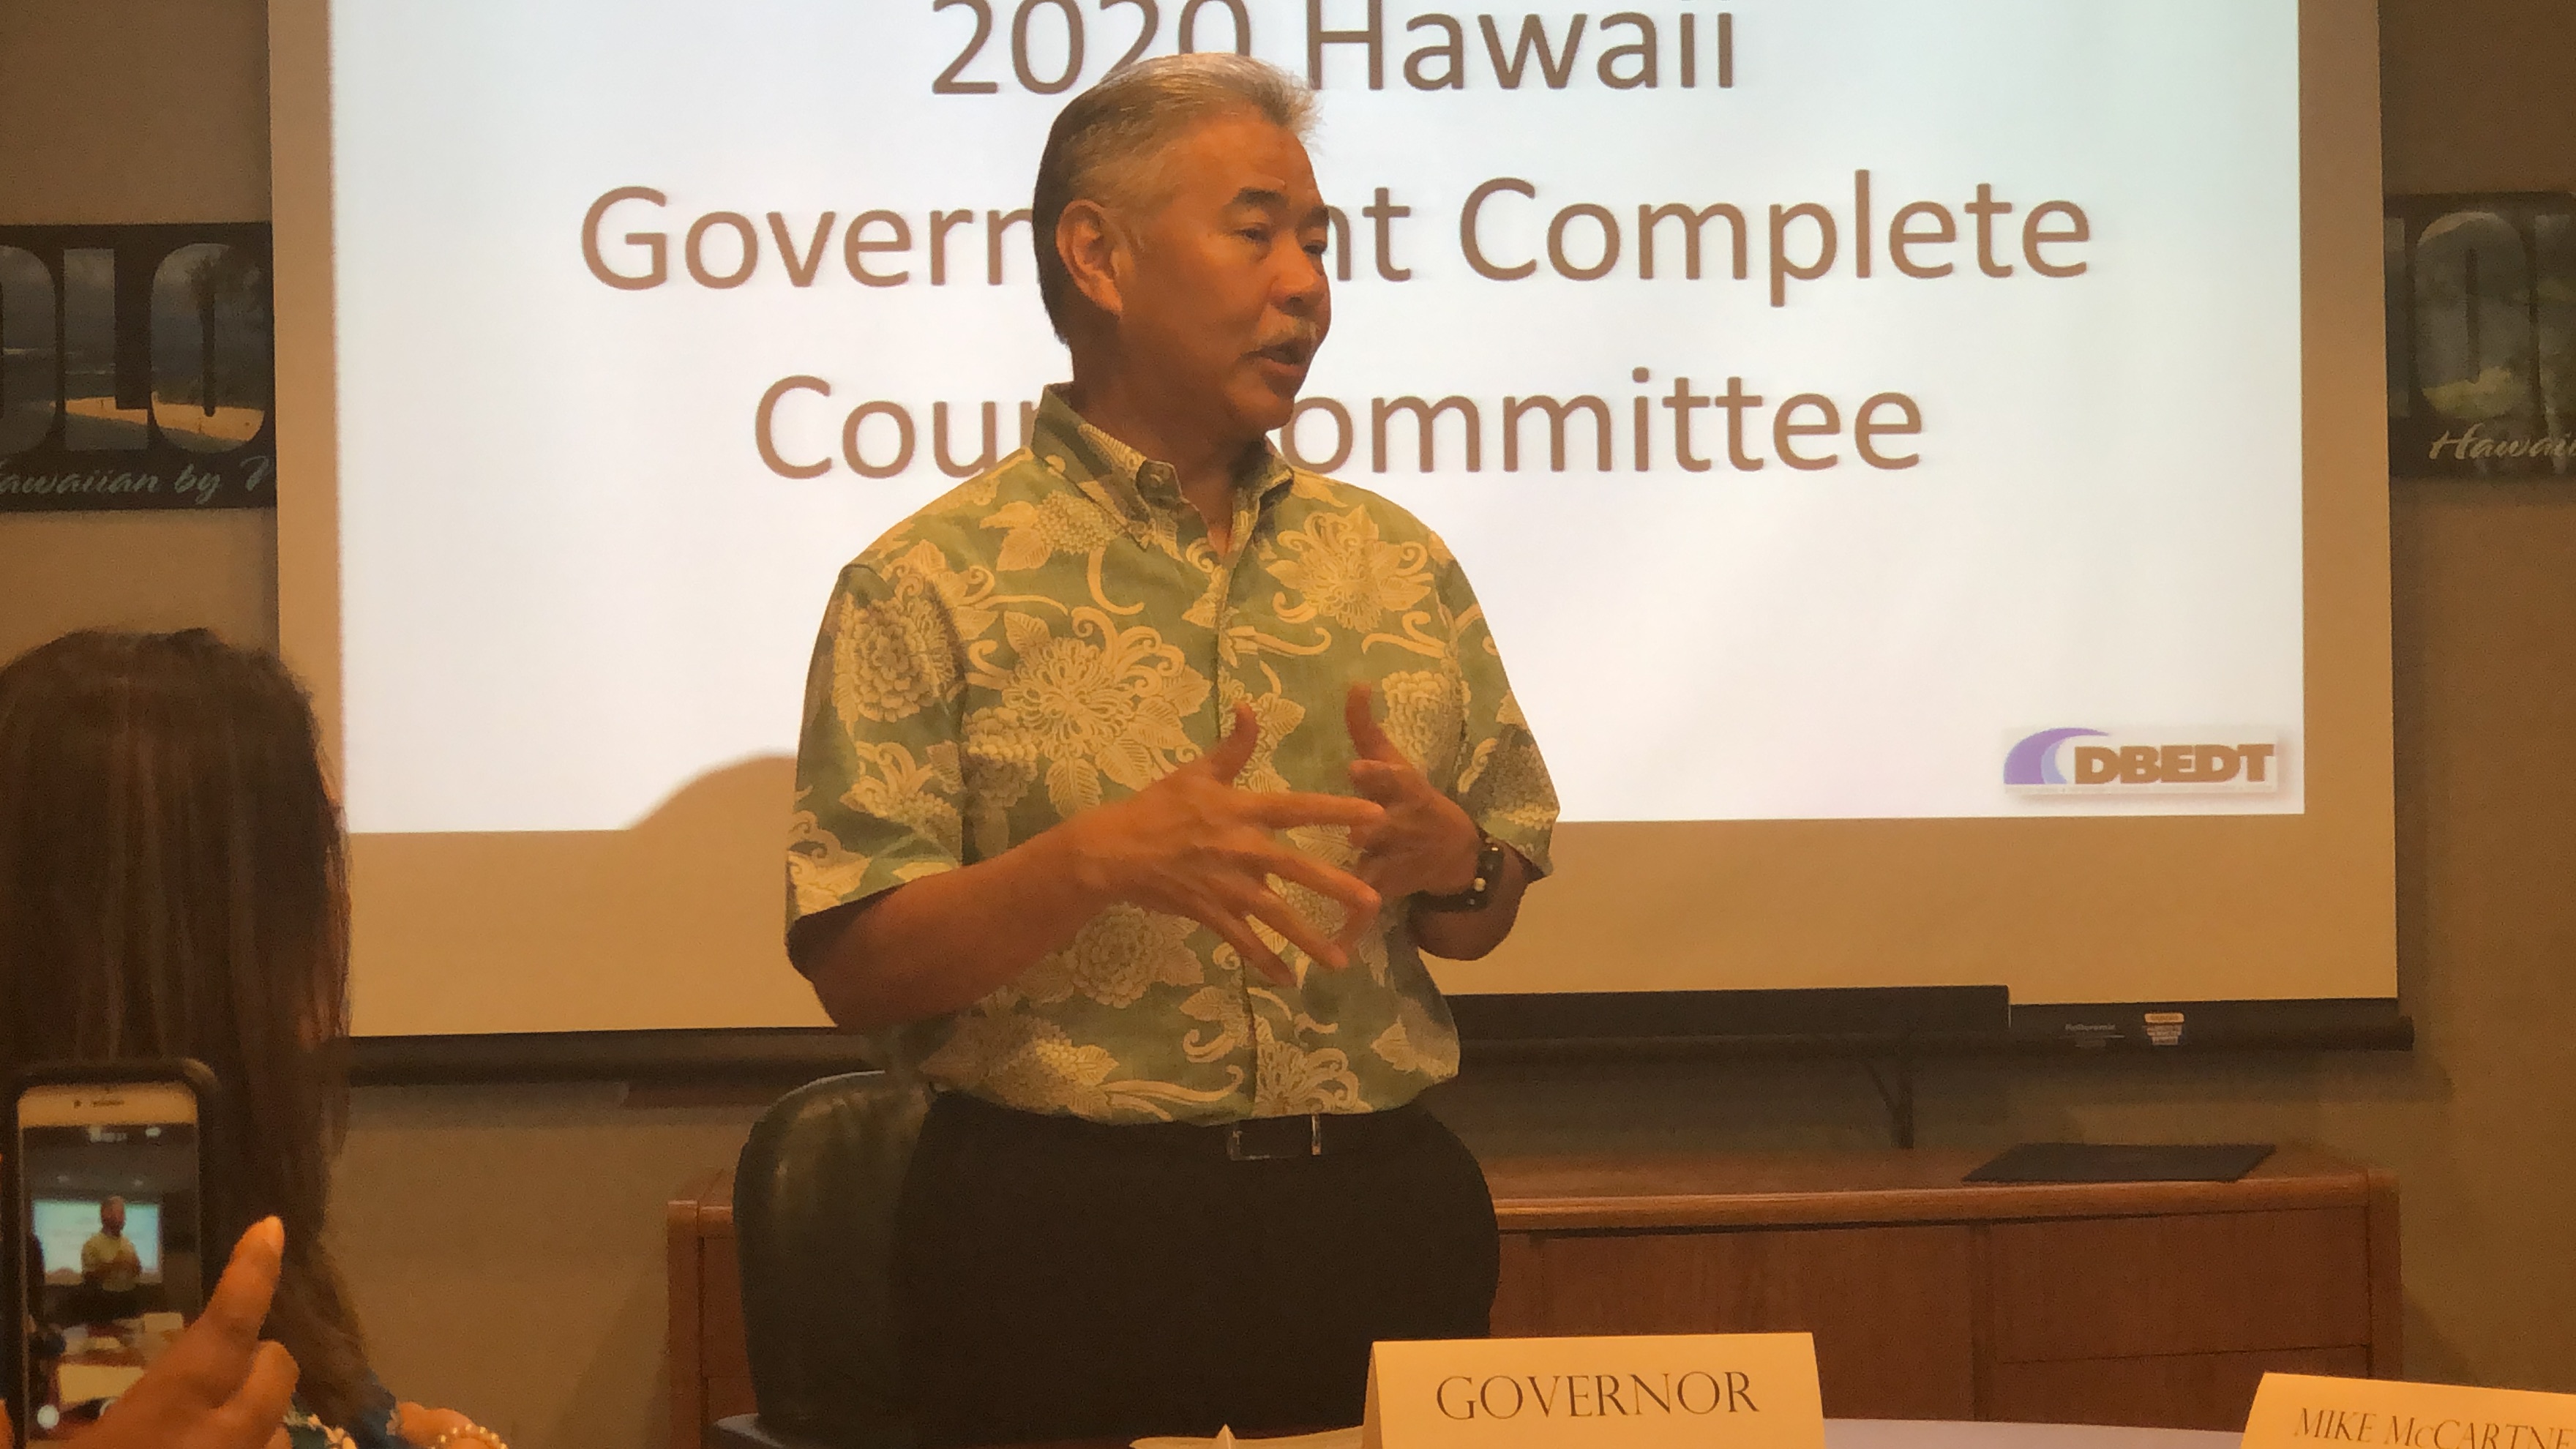 Governor Ige with HGCCC members